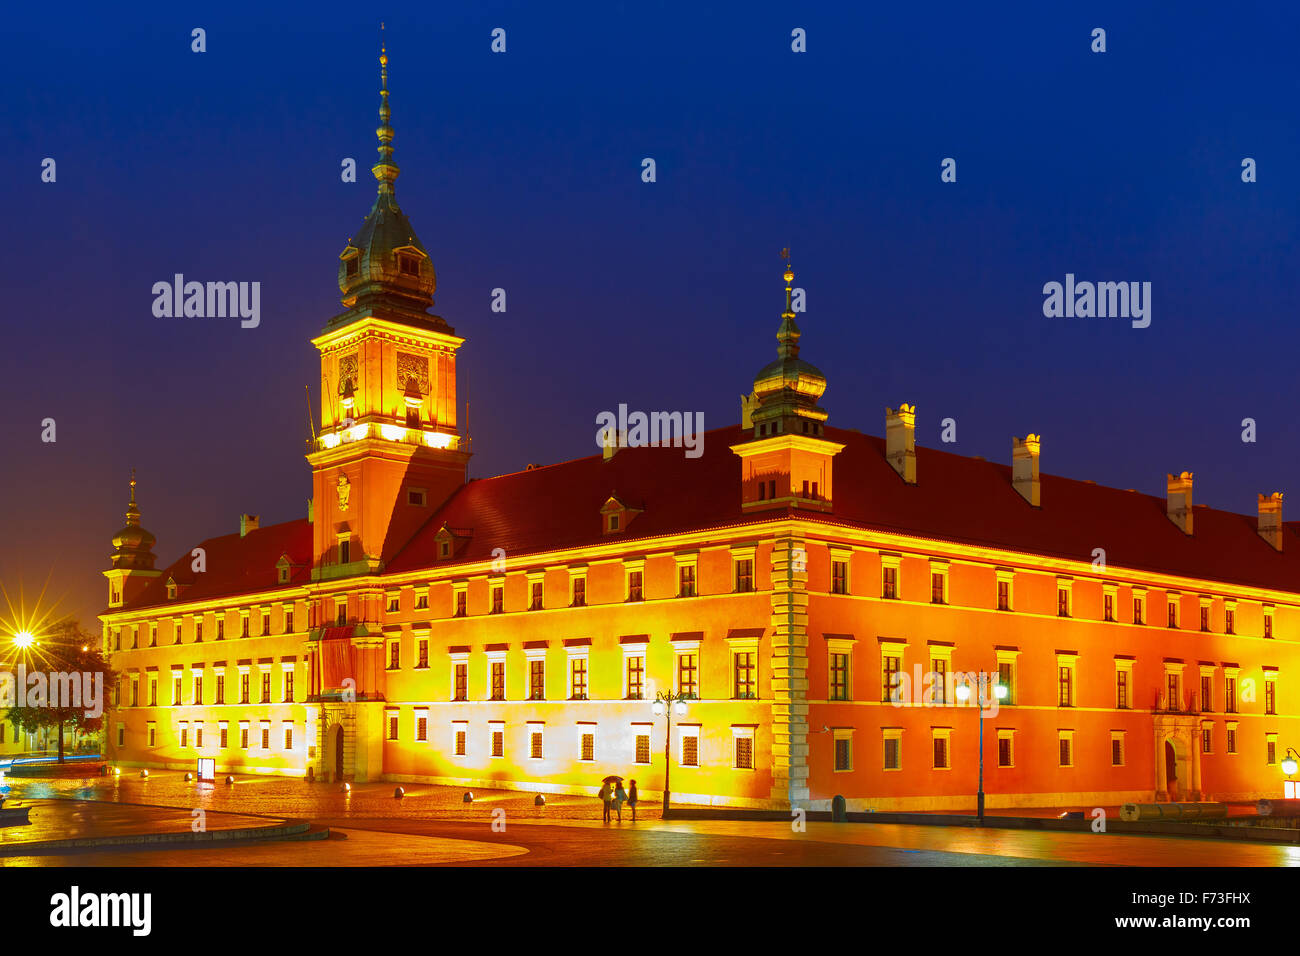 Royal Castle at night in Warsaw, Poland. Stock Photo